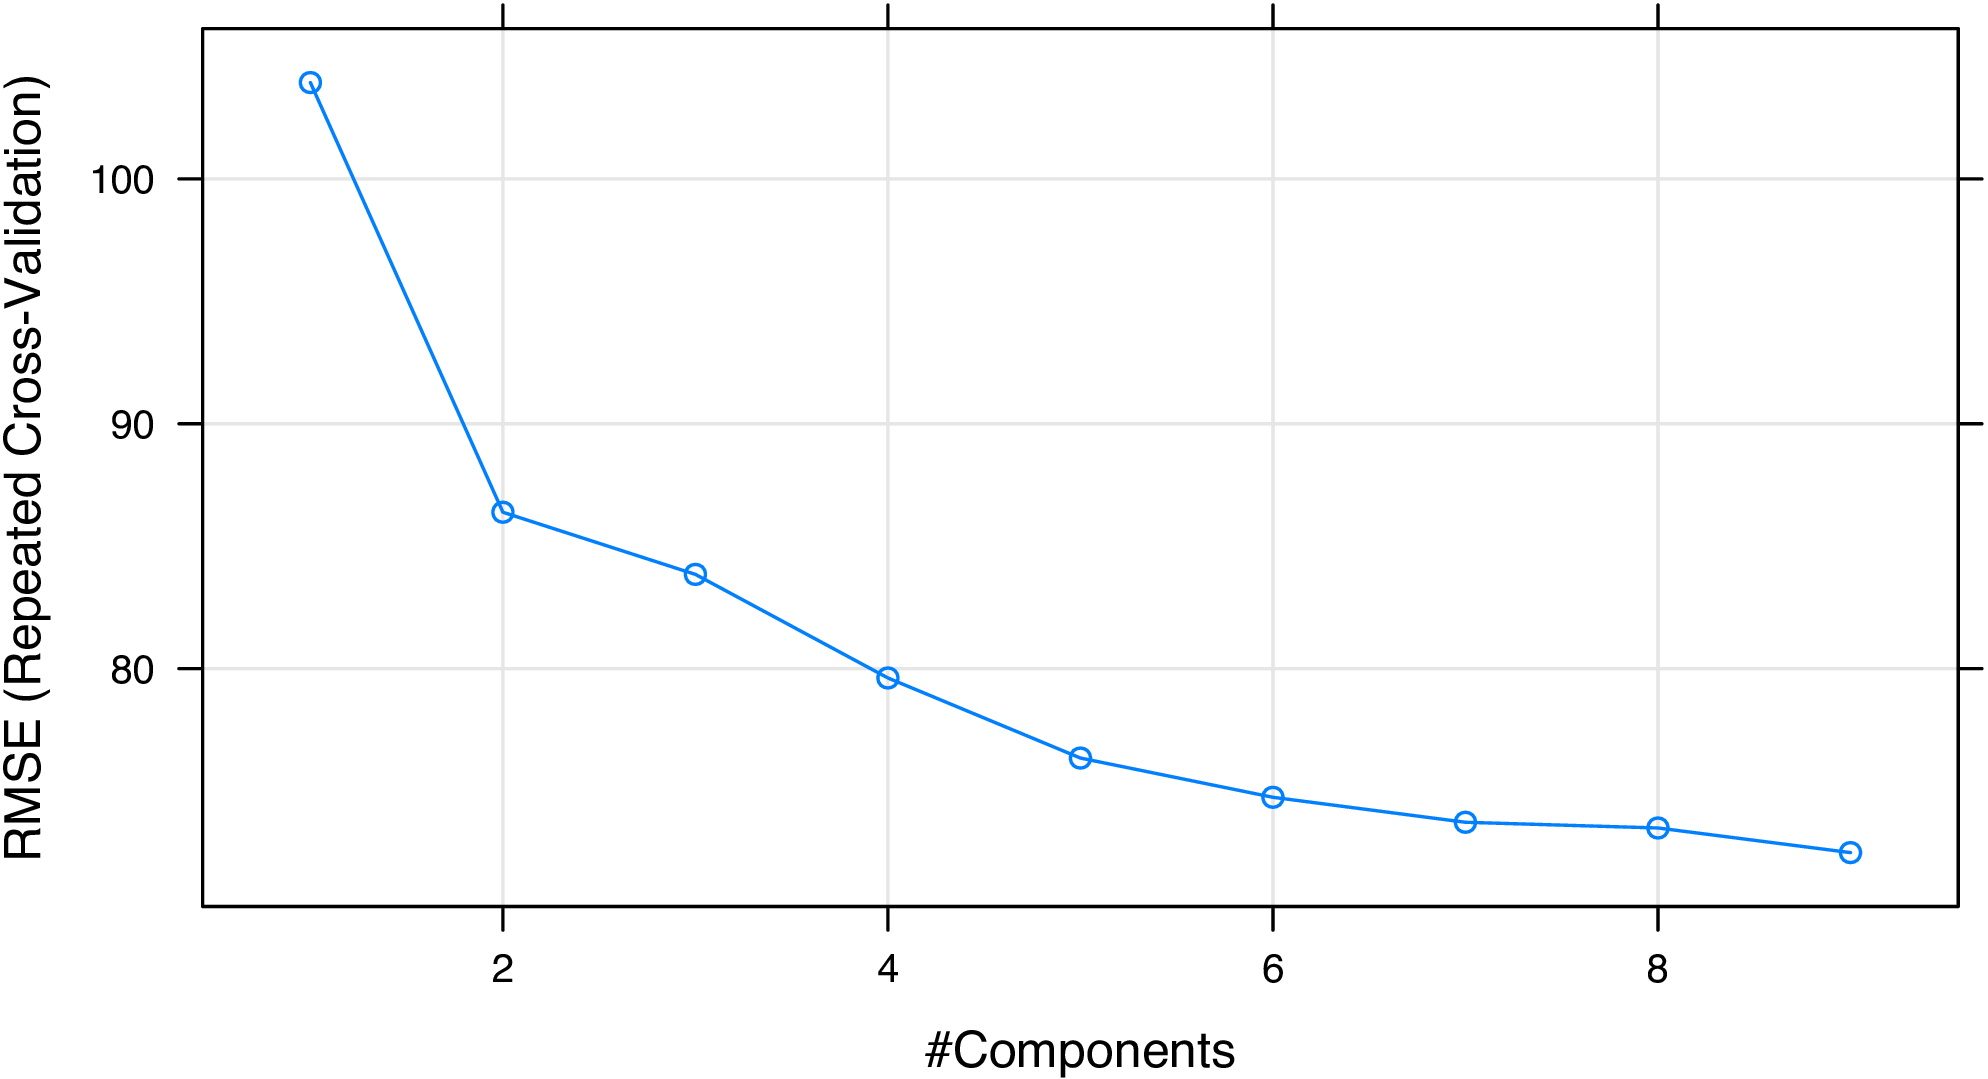 Figure 2: Number of principal components vs. RMSE for the PLS regression model.